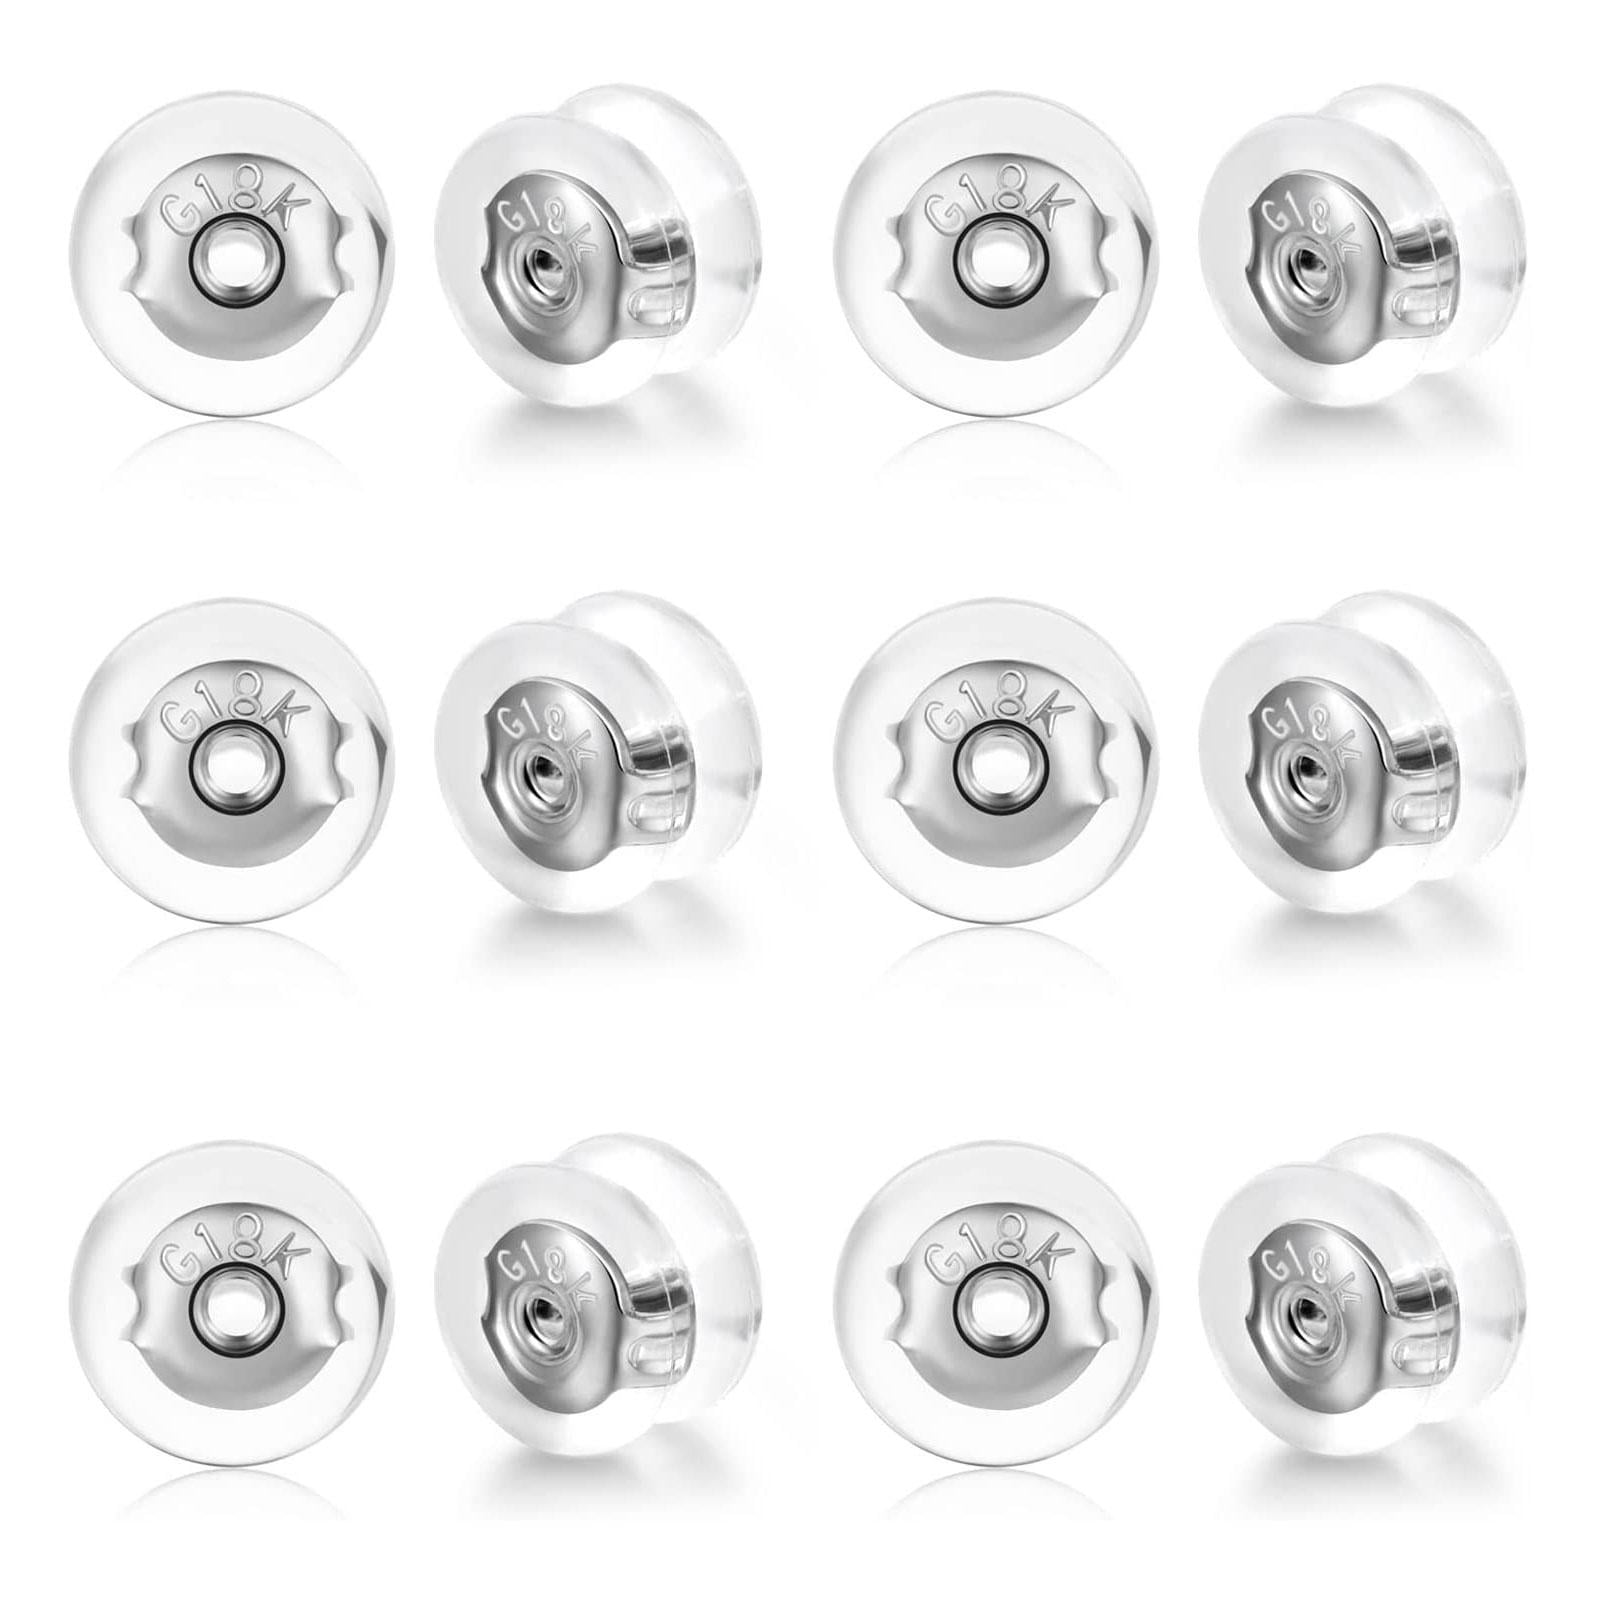 Silicone Earring Backs, Roctee Real 925 Solid Silver Earring Backs for  Studs, 18 PCS Silicone Locking